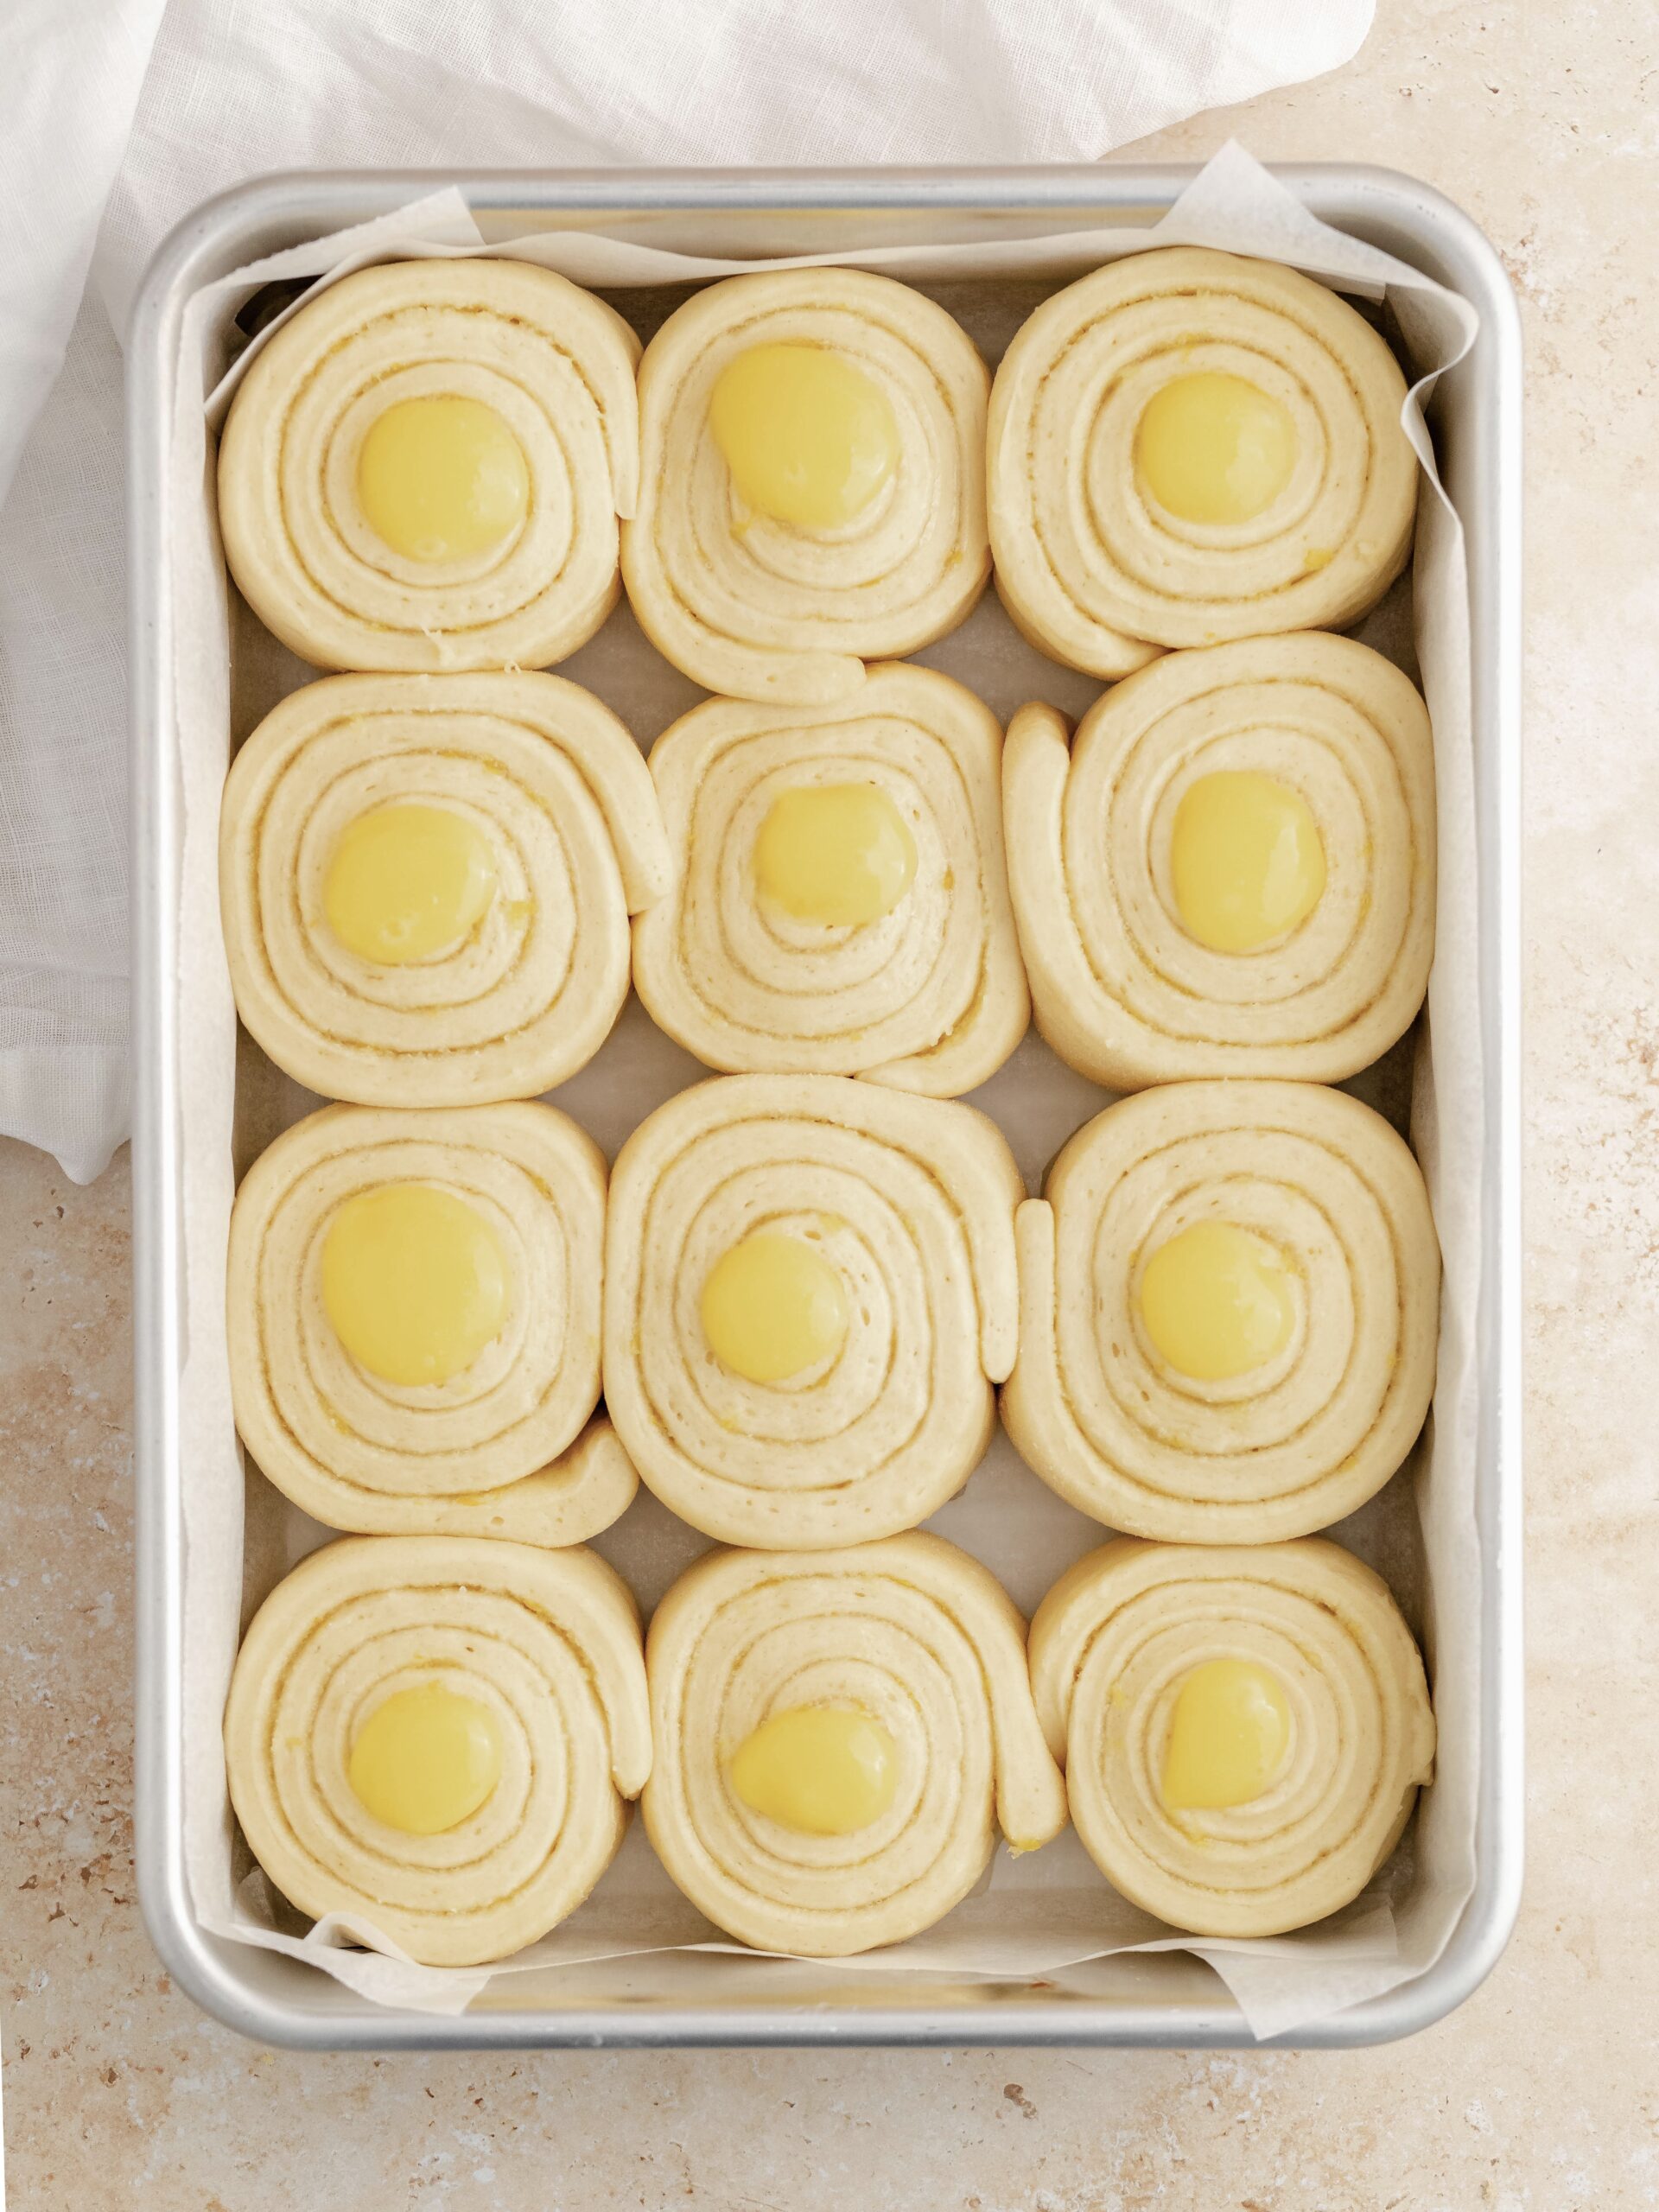 Lemon rolls in the baking tray filled with lemon curd.